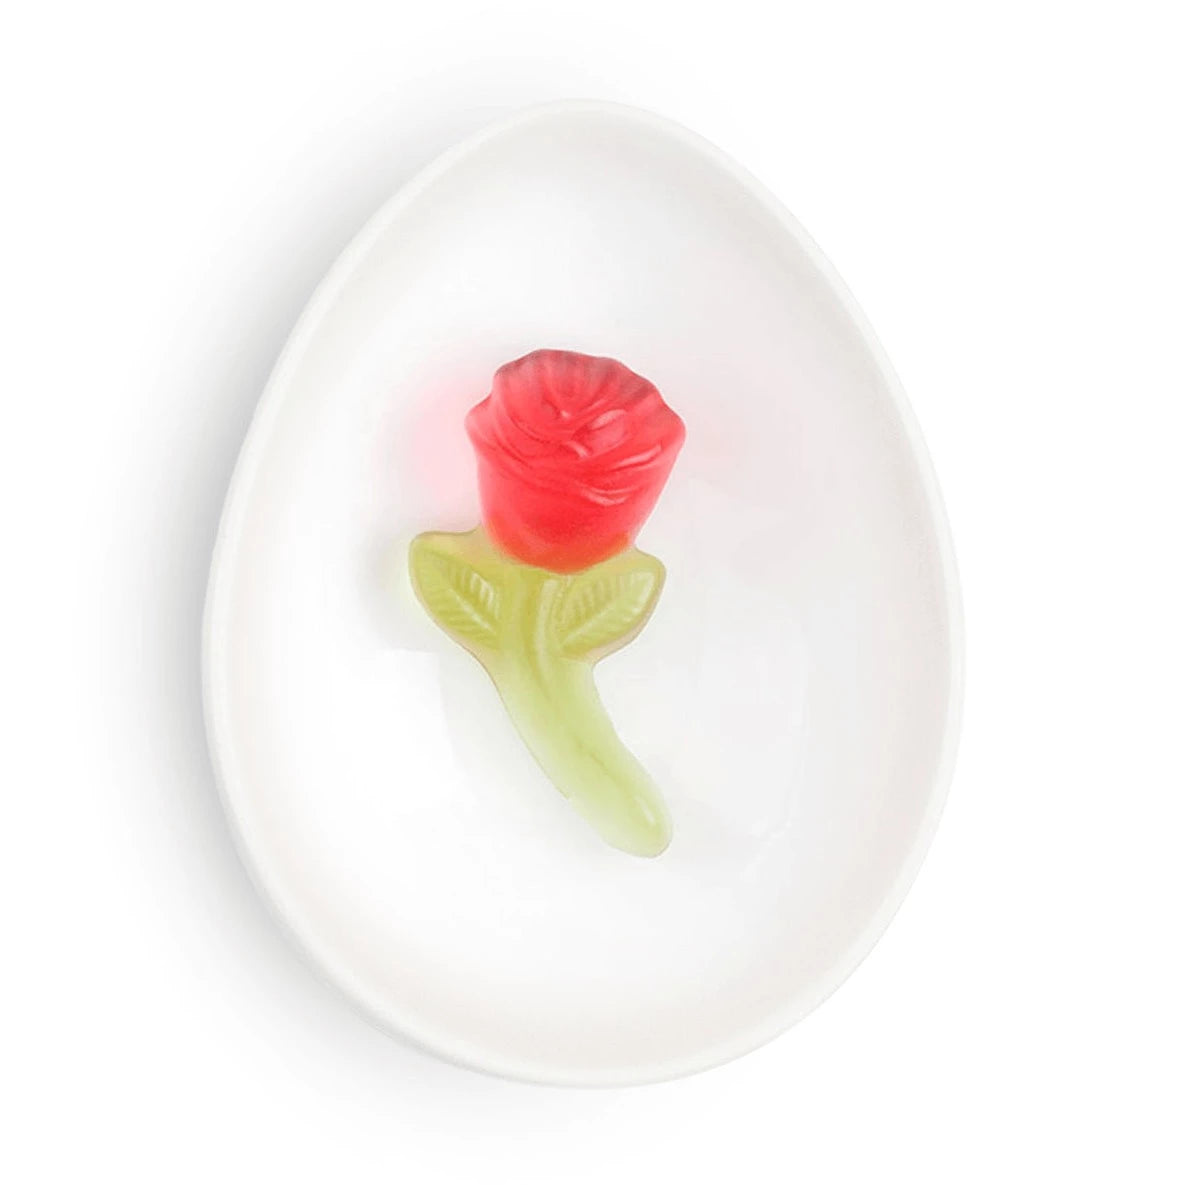 red rose gummy with green stem on white dish